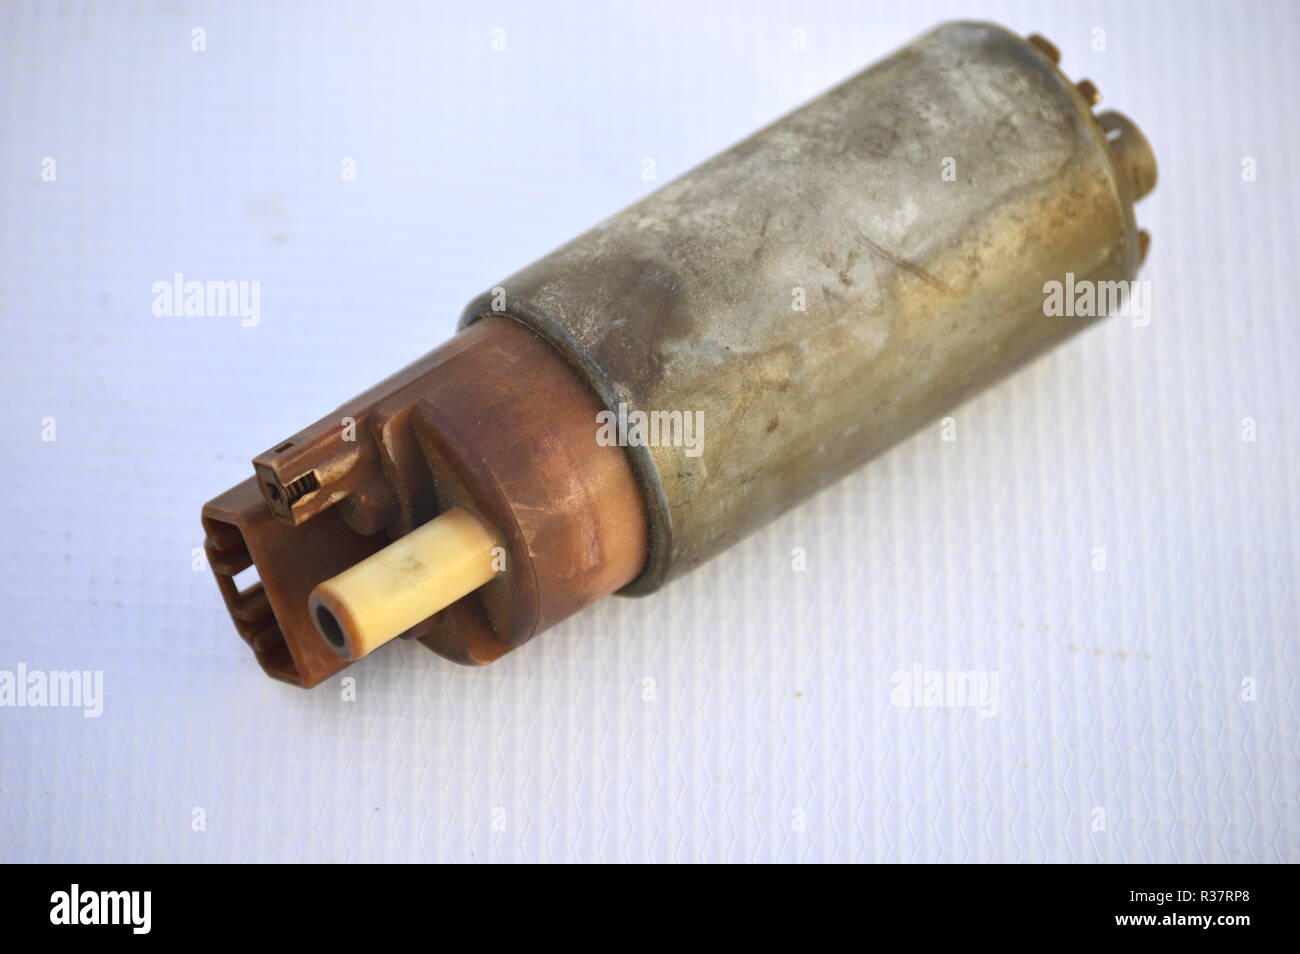 Car Parts: Internal Fuel pump on white background Stock Photo